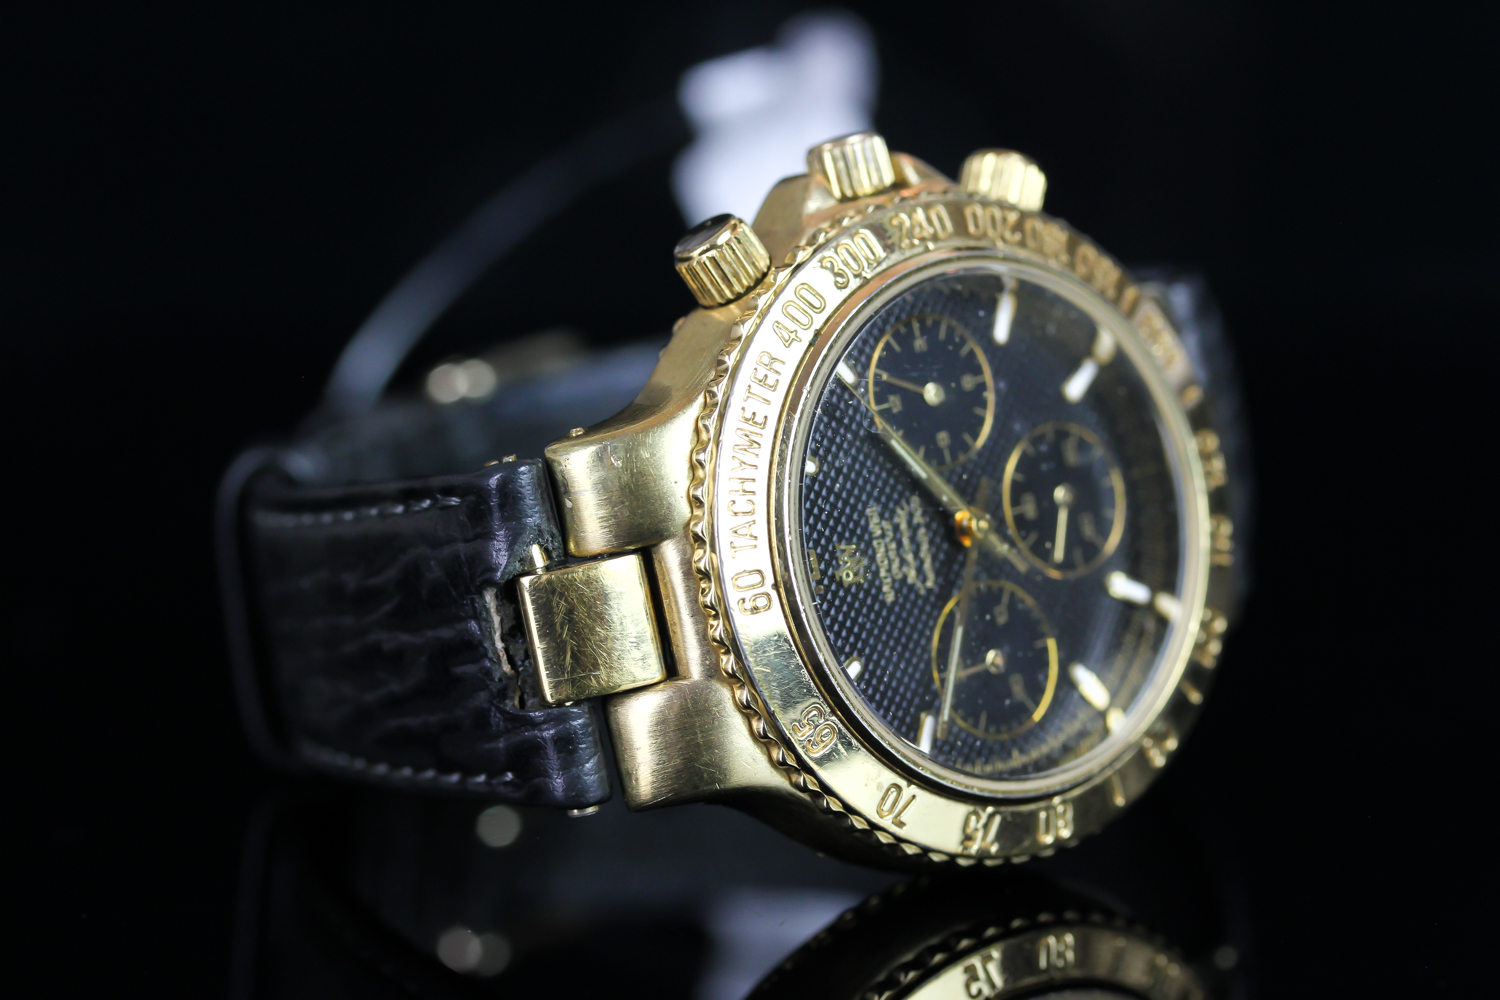 GENTLEMEN'S RAYMOND WEIL AMADEUS CHRONOGRAPH 7705, round, black dial with gold hands, baton markers, - Image 2 of 4